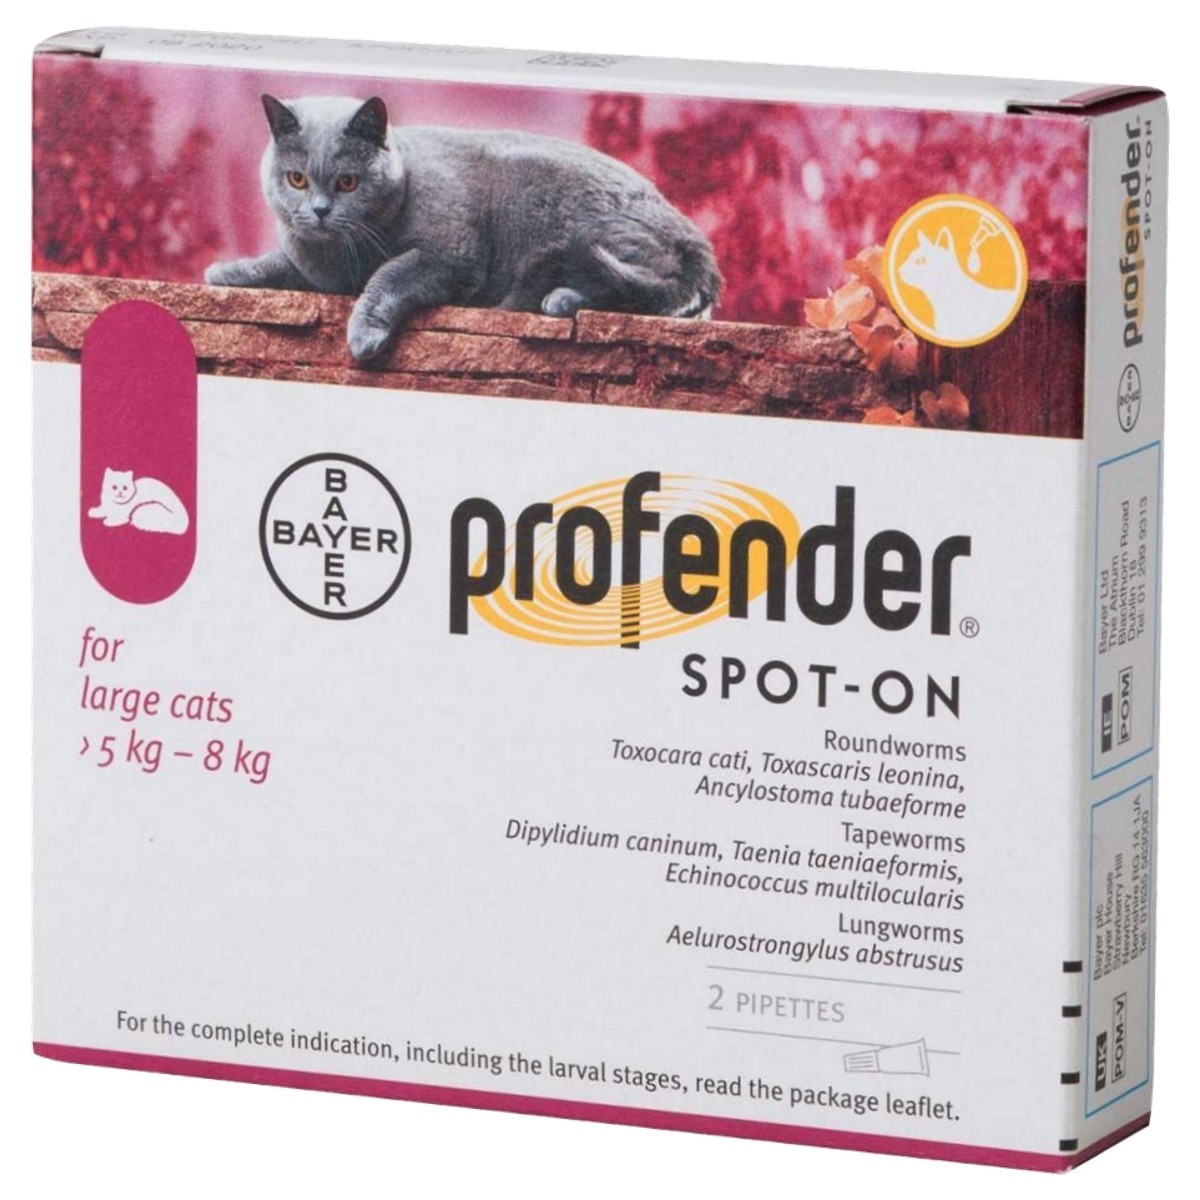 profender for cats